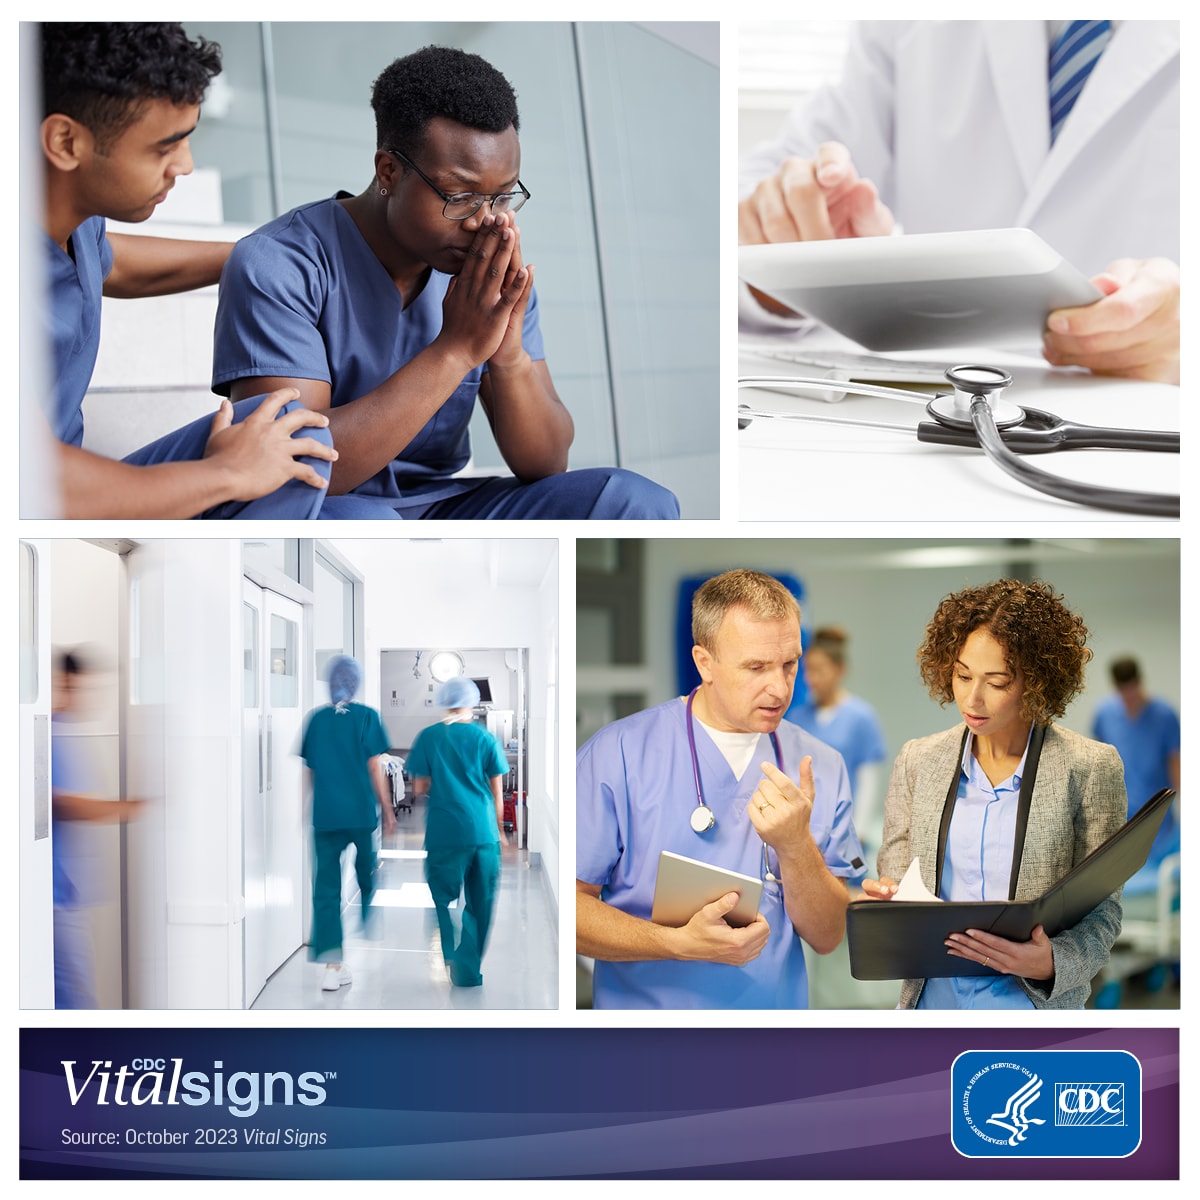 Photo collage of a health care provider comforting another health care provider, doctor working on a tablet, nurses walking through a hospital, and two health care providers having a discussion.